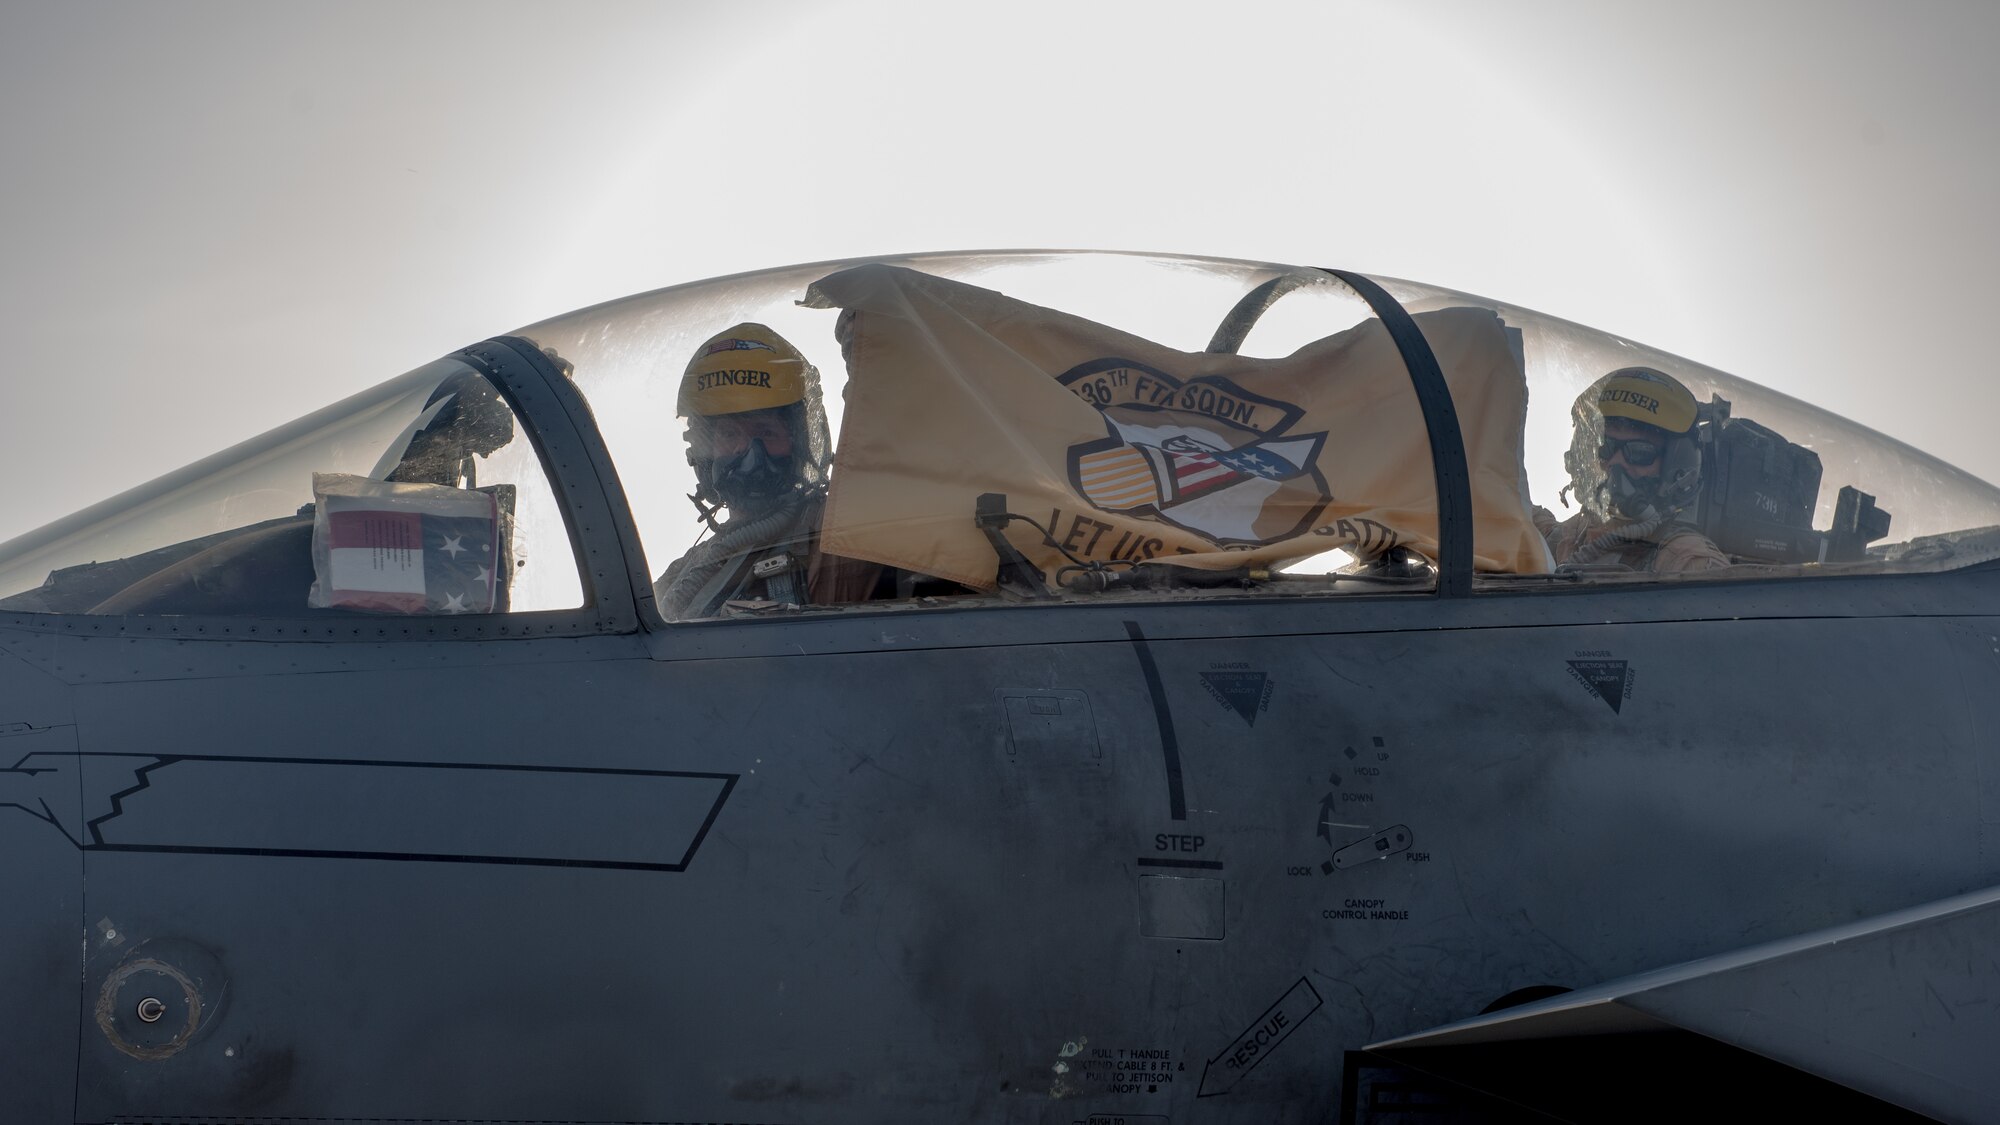 F-15E Strike Eagle aircrew hold up their 336th Fighter Squadron flag, June 13, 2019, at Al Dhafra Air Base, United Arab Emirates. The 336th FS deployed from the 4th Fighter Wing at Seymour Johnson AFB, North Carolina, bringing additional air power to Team ADAB. (U.S. Air Force photo by Staff Sgt. Chris Thornbury)